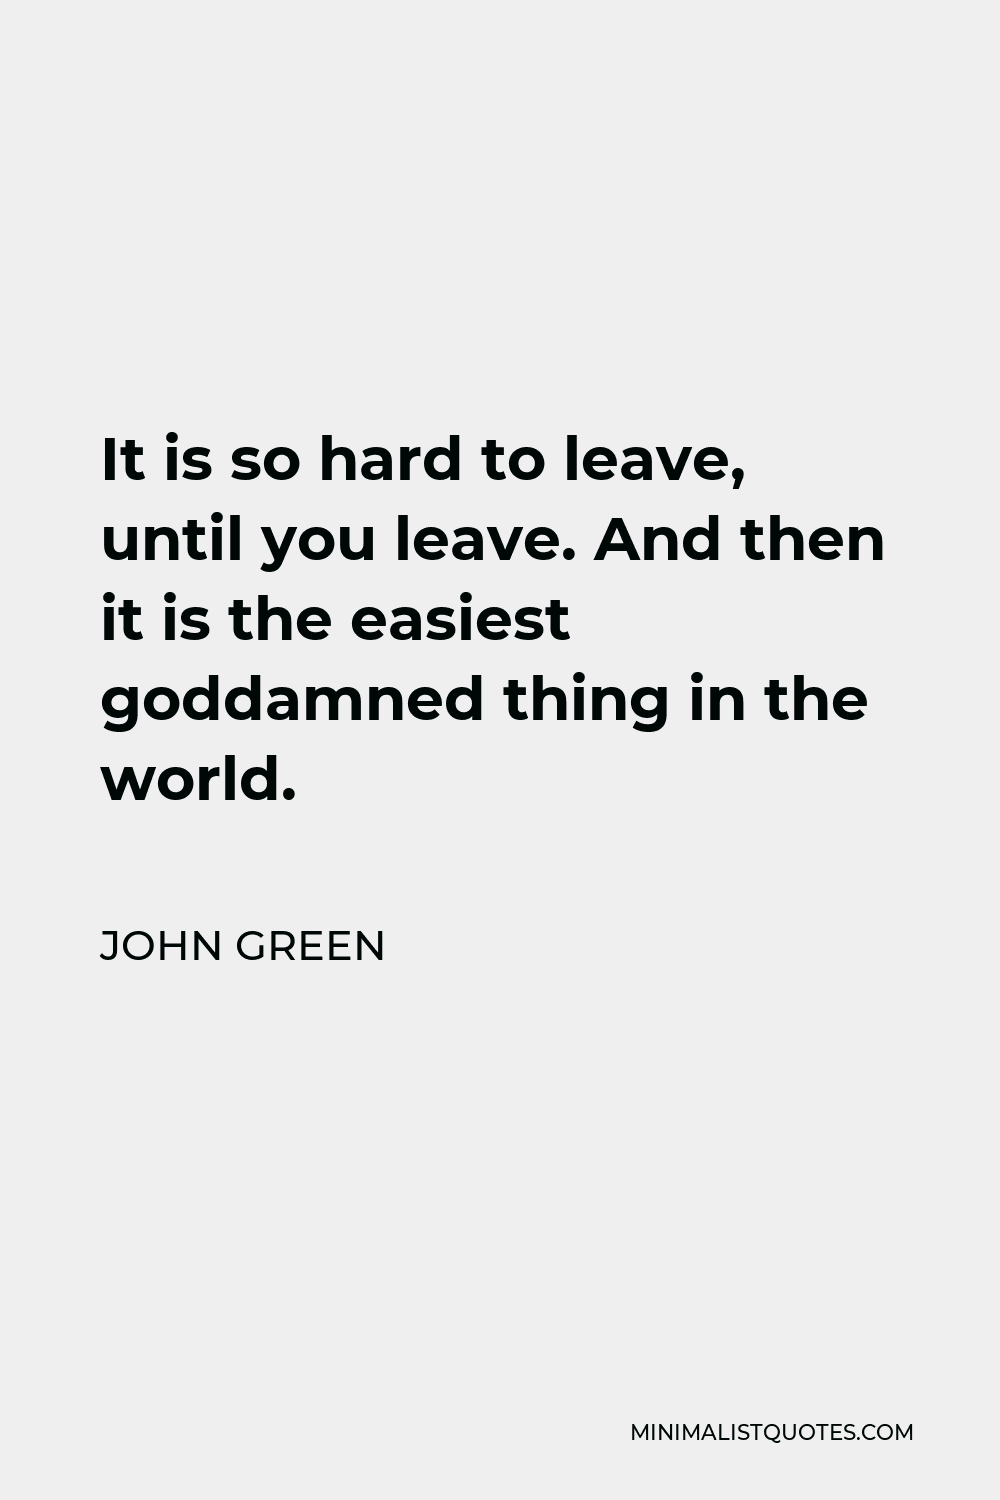 John Green Quote - It is so hard to leave, until you leave. And then it is the easiest goddamned thing in the world.